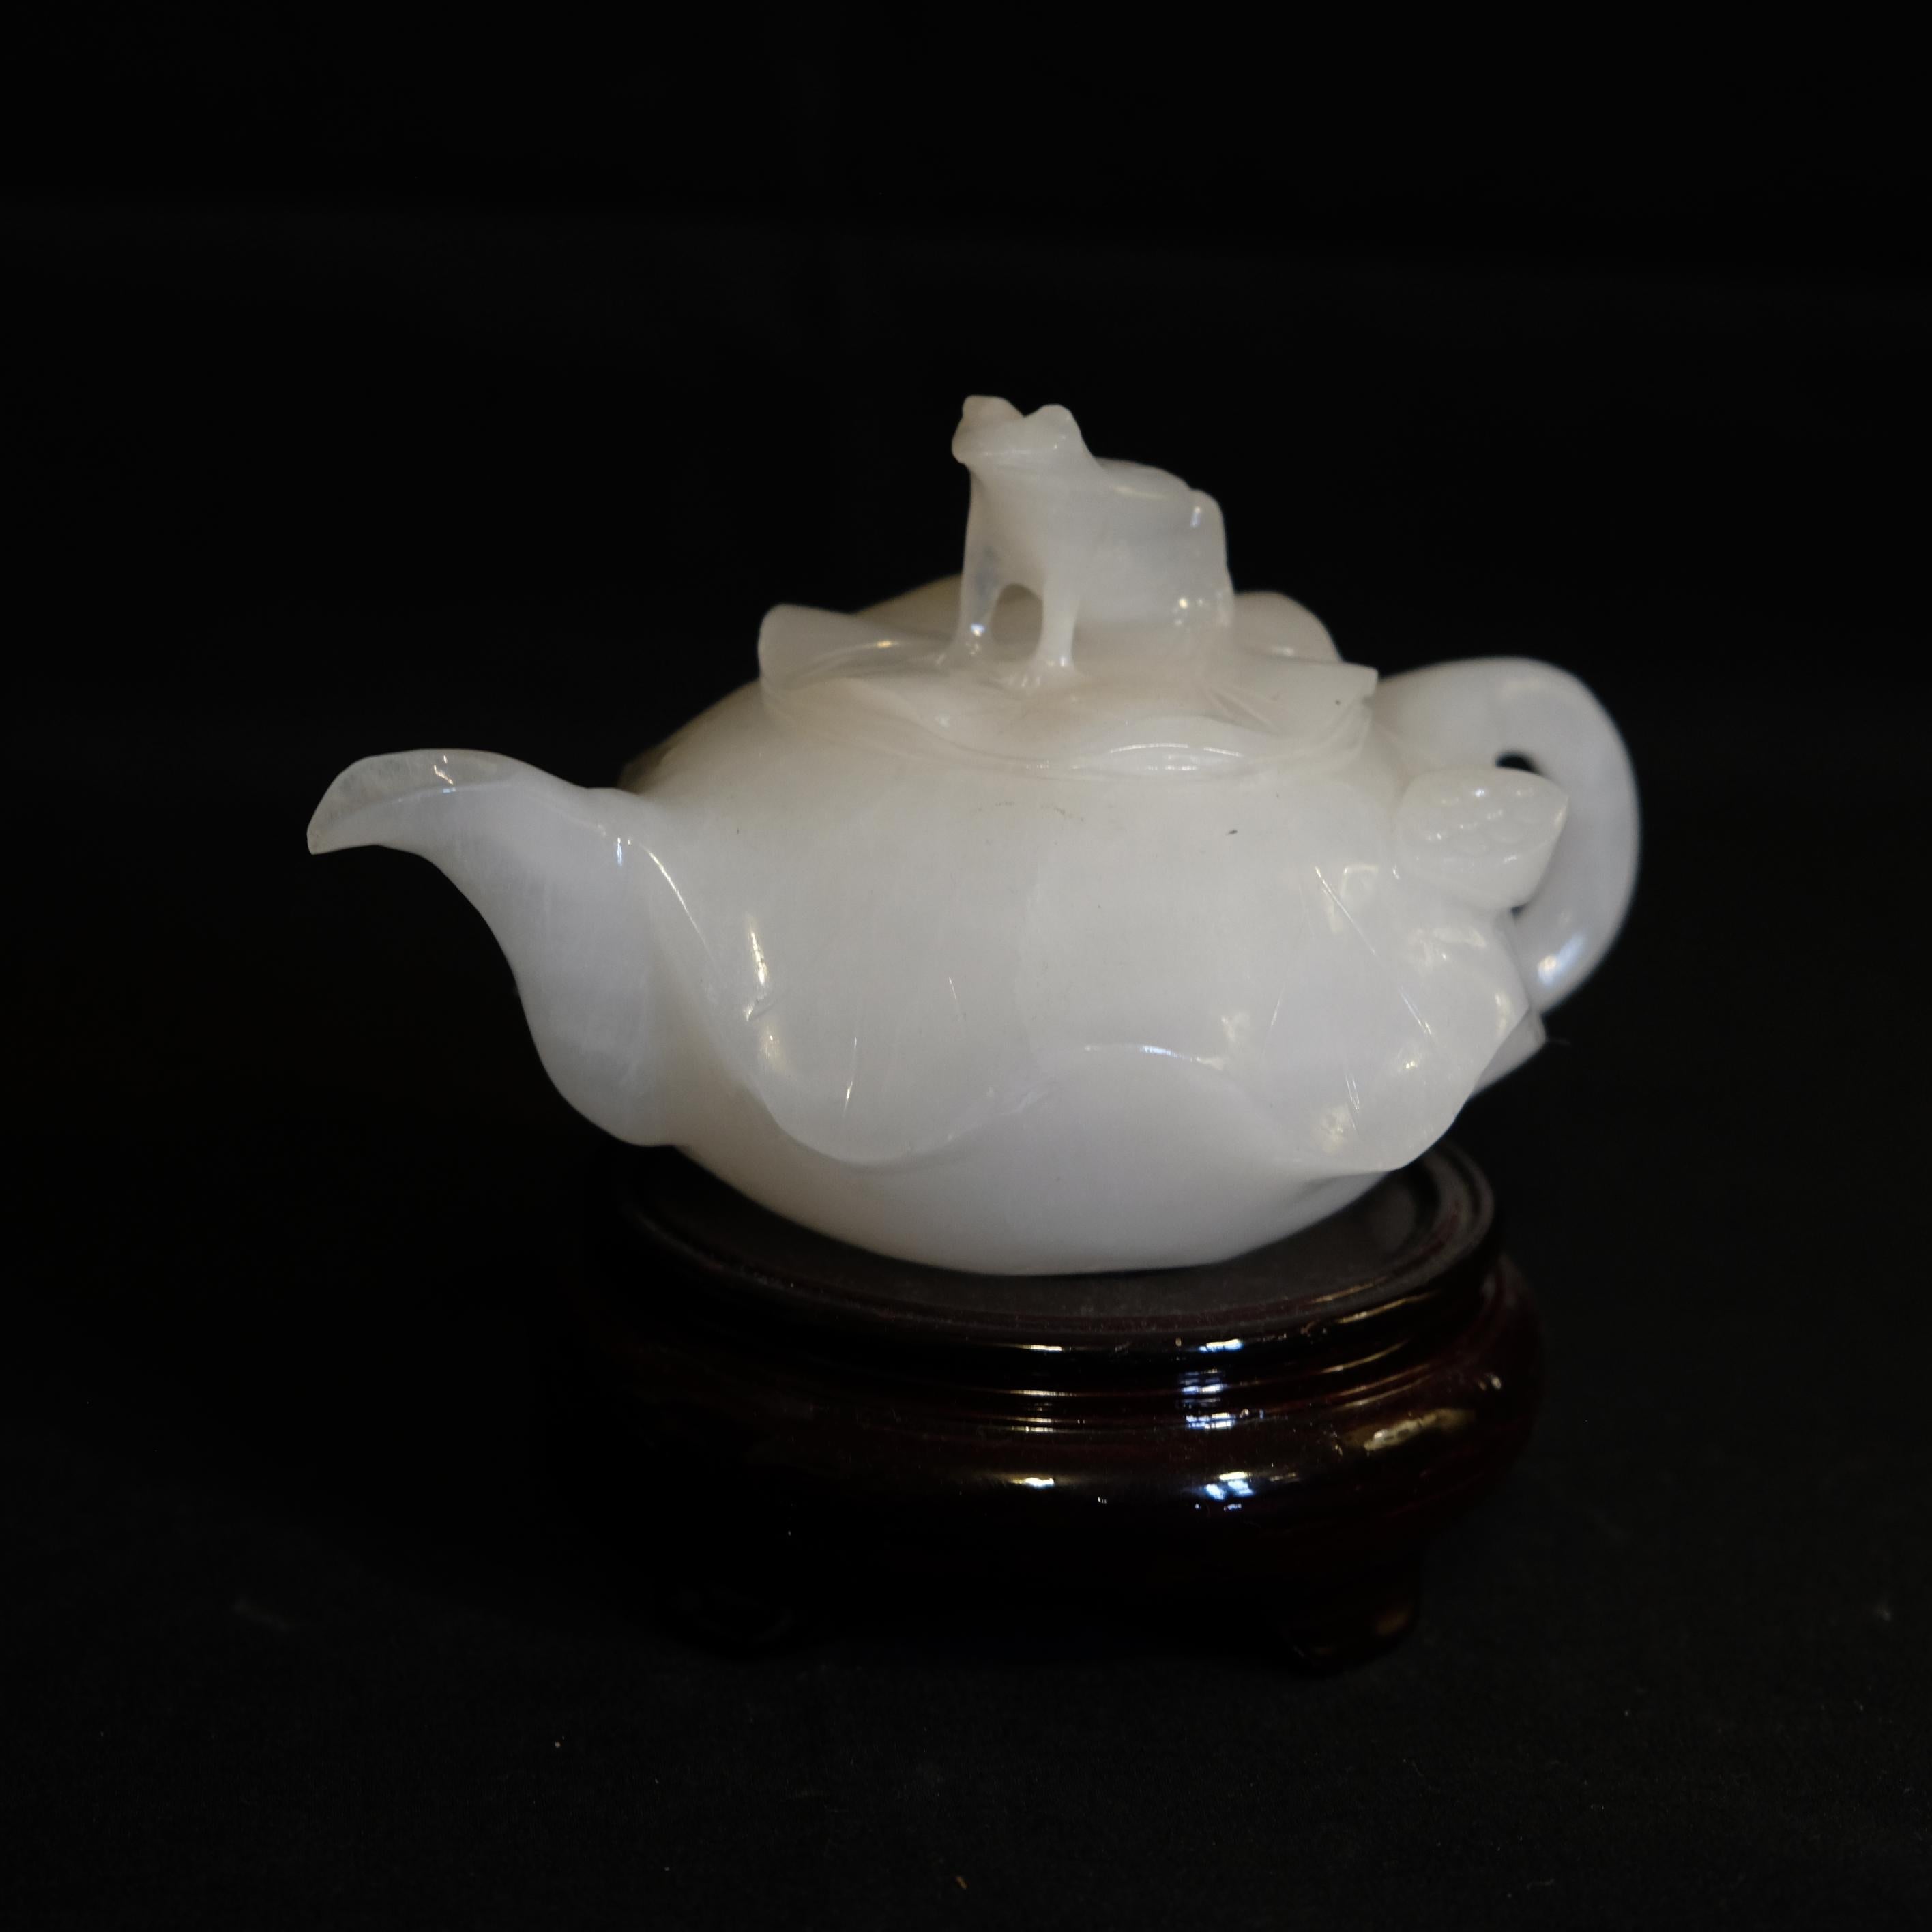 Chinese antique Pakistan jade teapot with wood stand. An unusual waved carving on the entire teapot, the lid with an animal finial on the top.